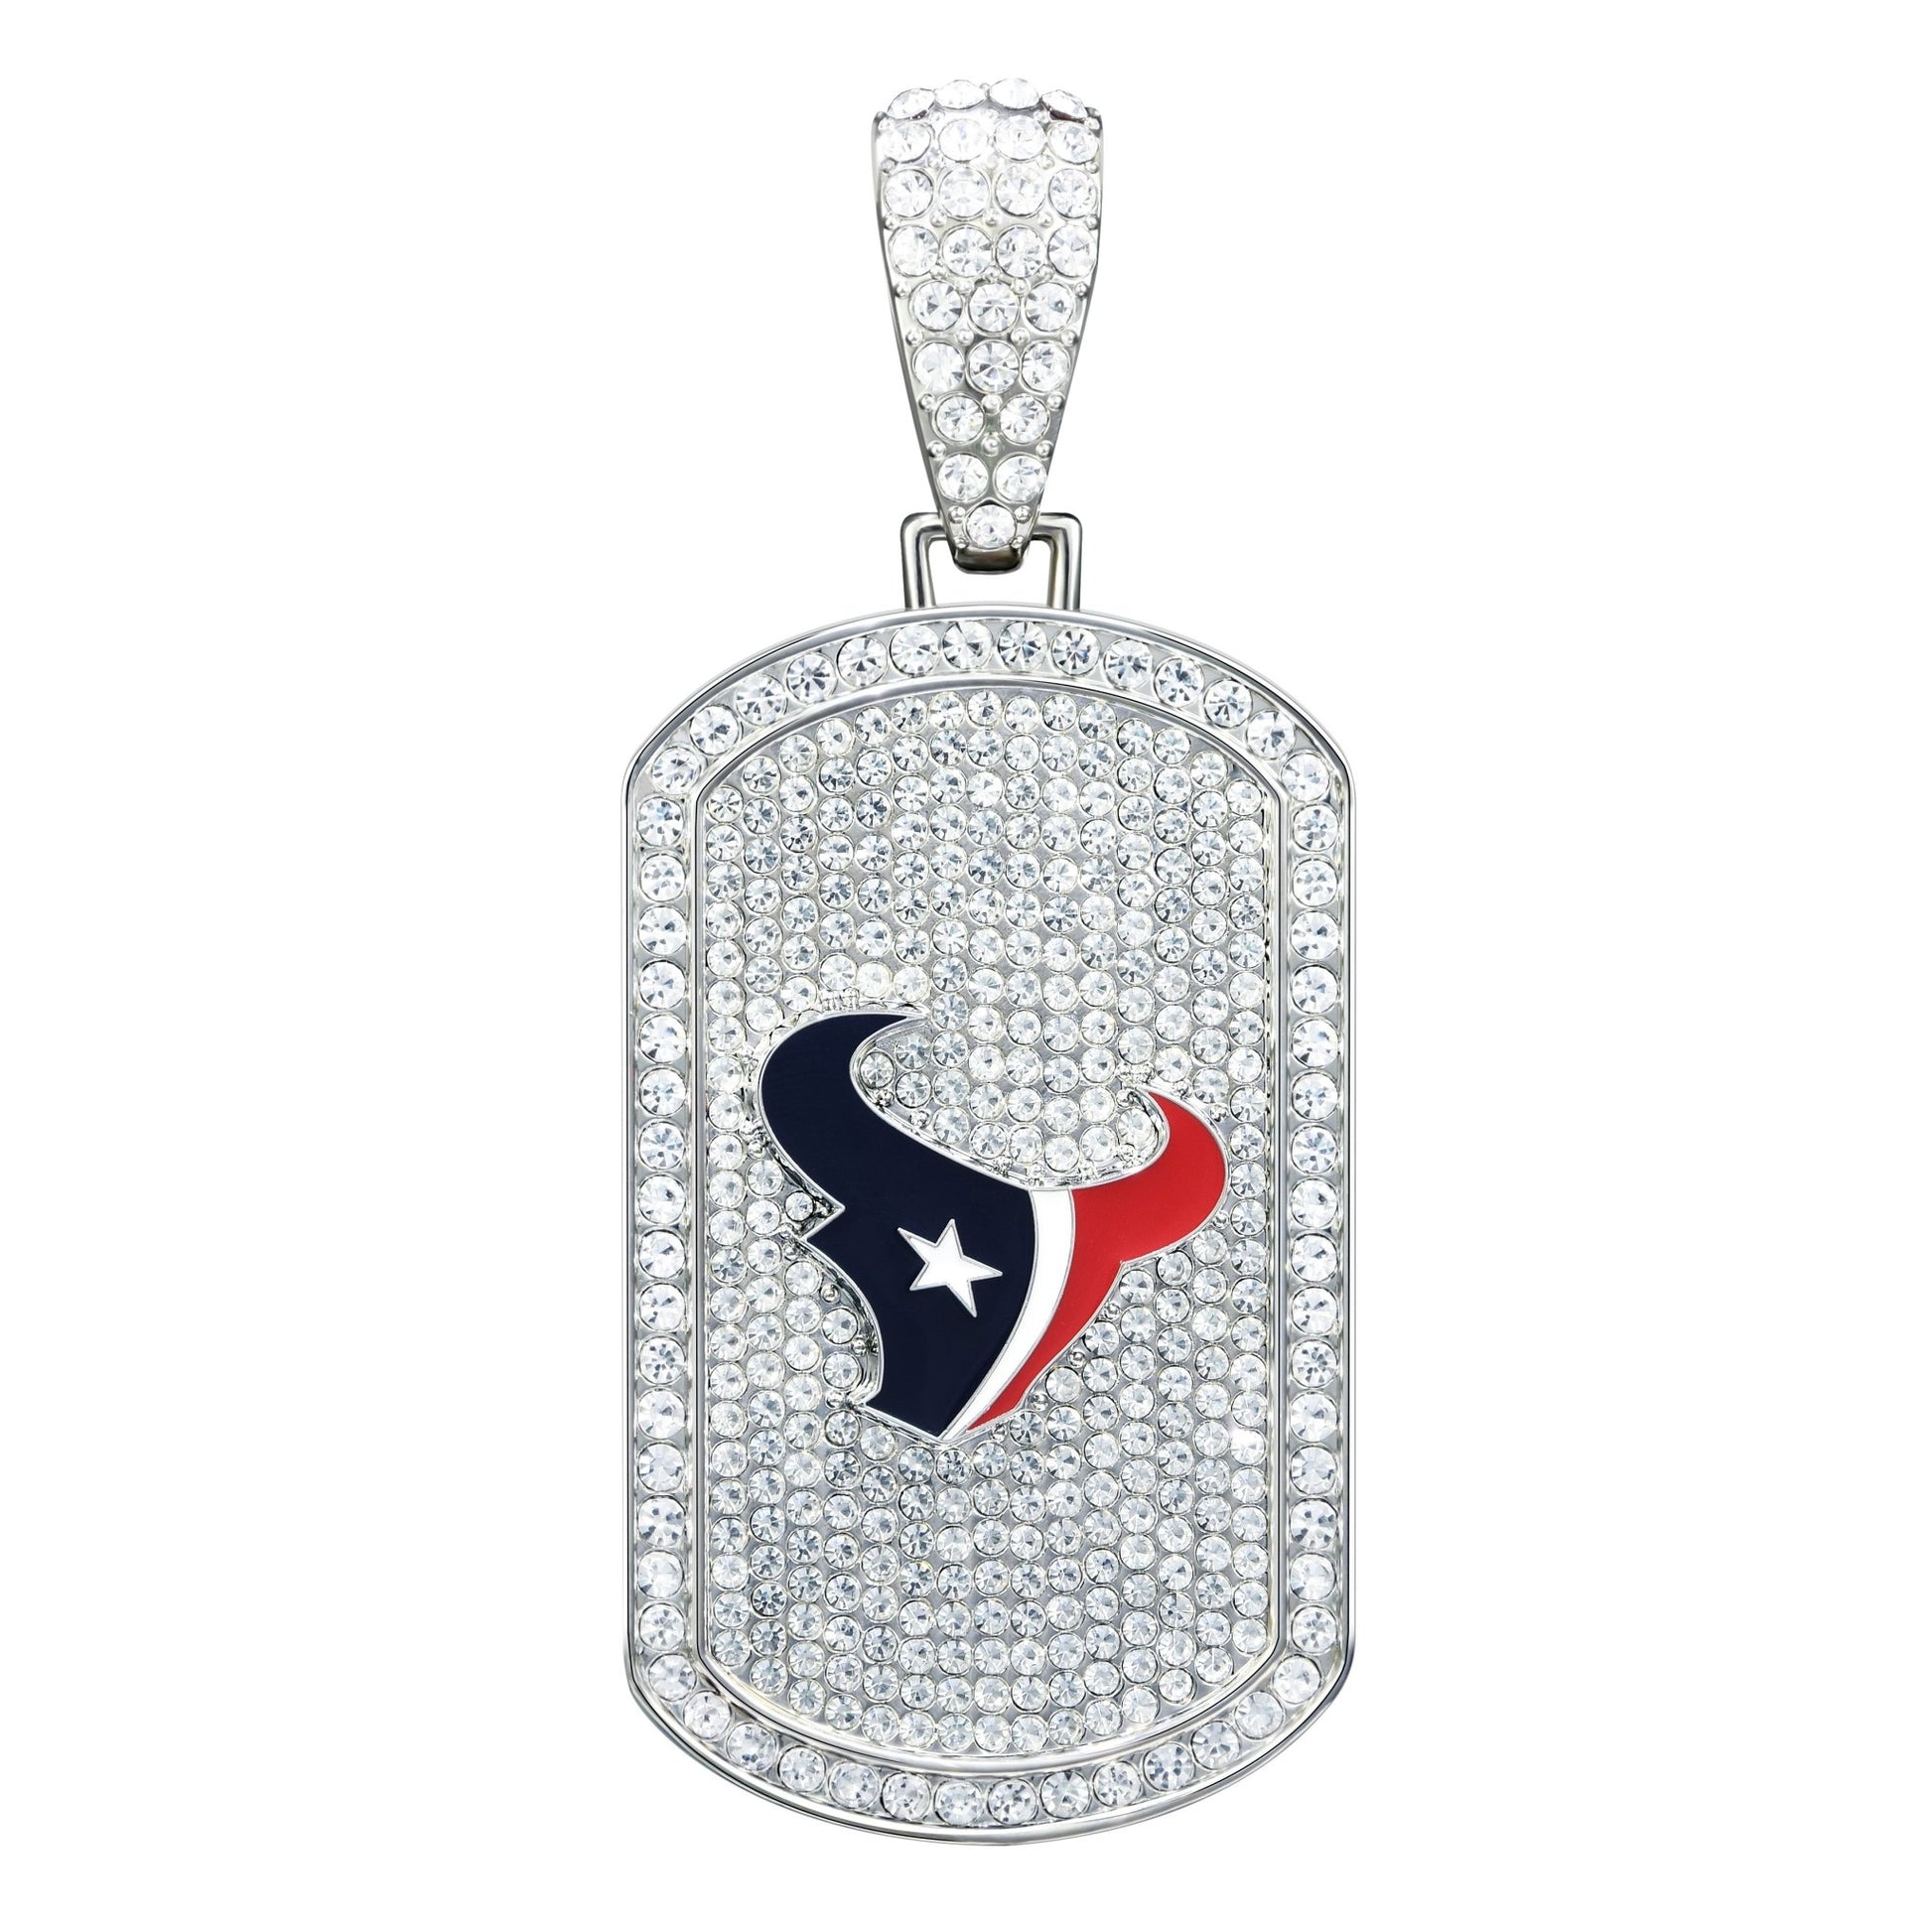 NFL Bling Dog Tag Necklace - Gamedays Gear - Houston Texans